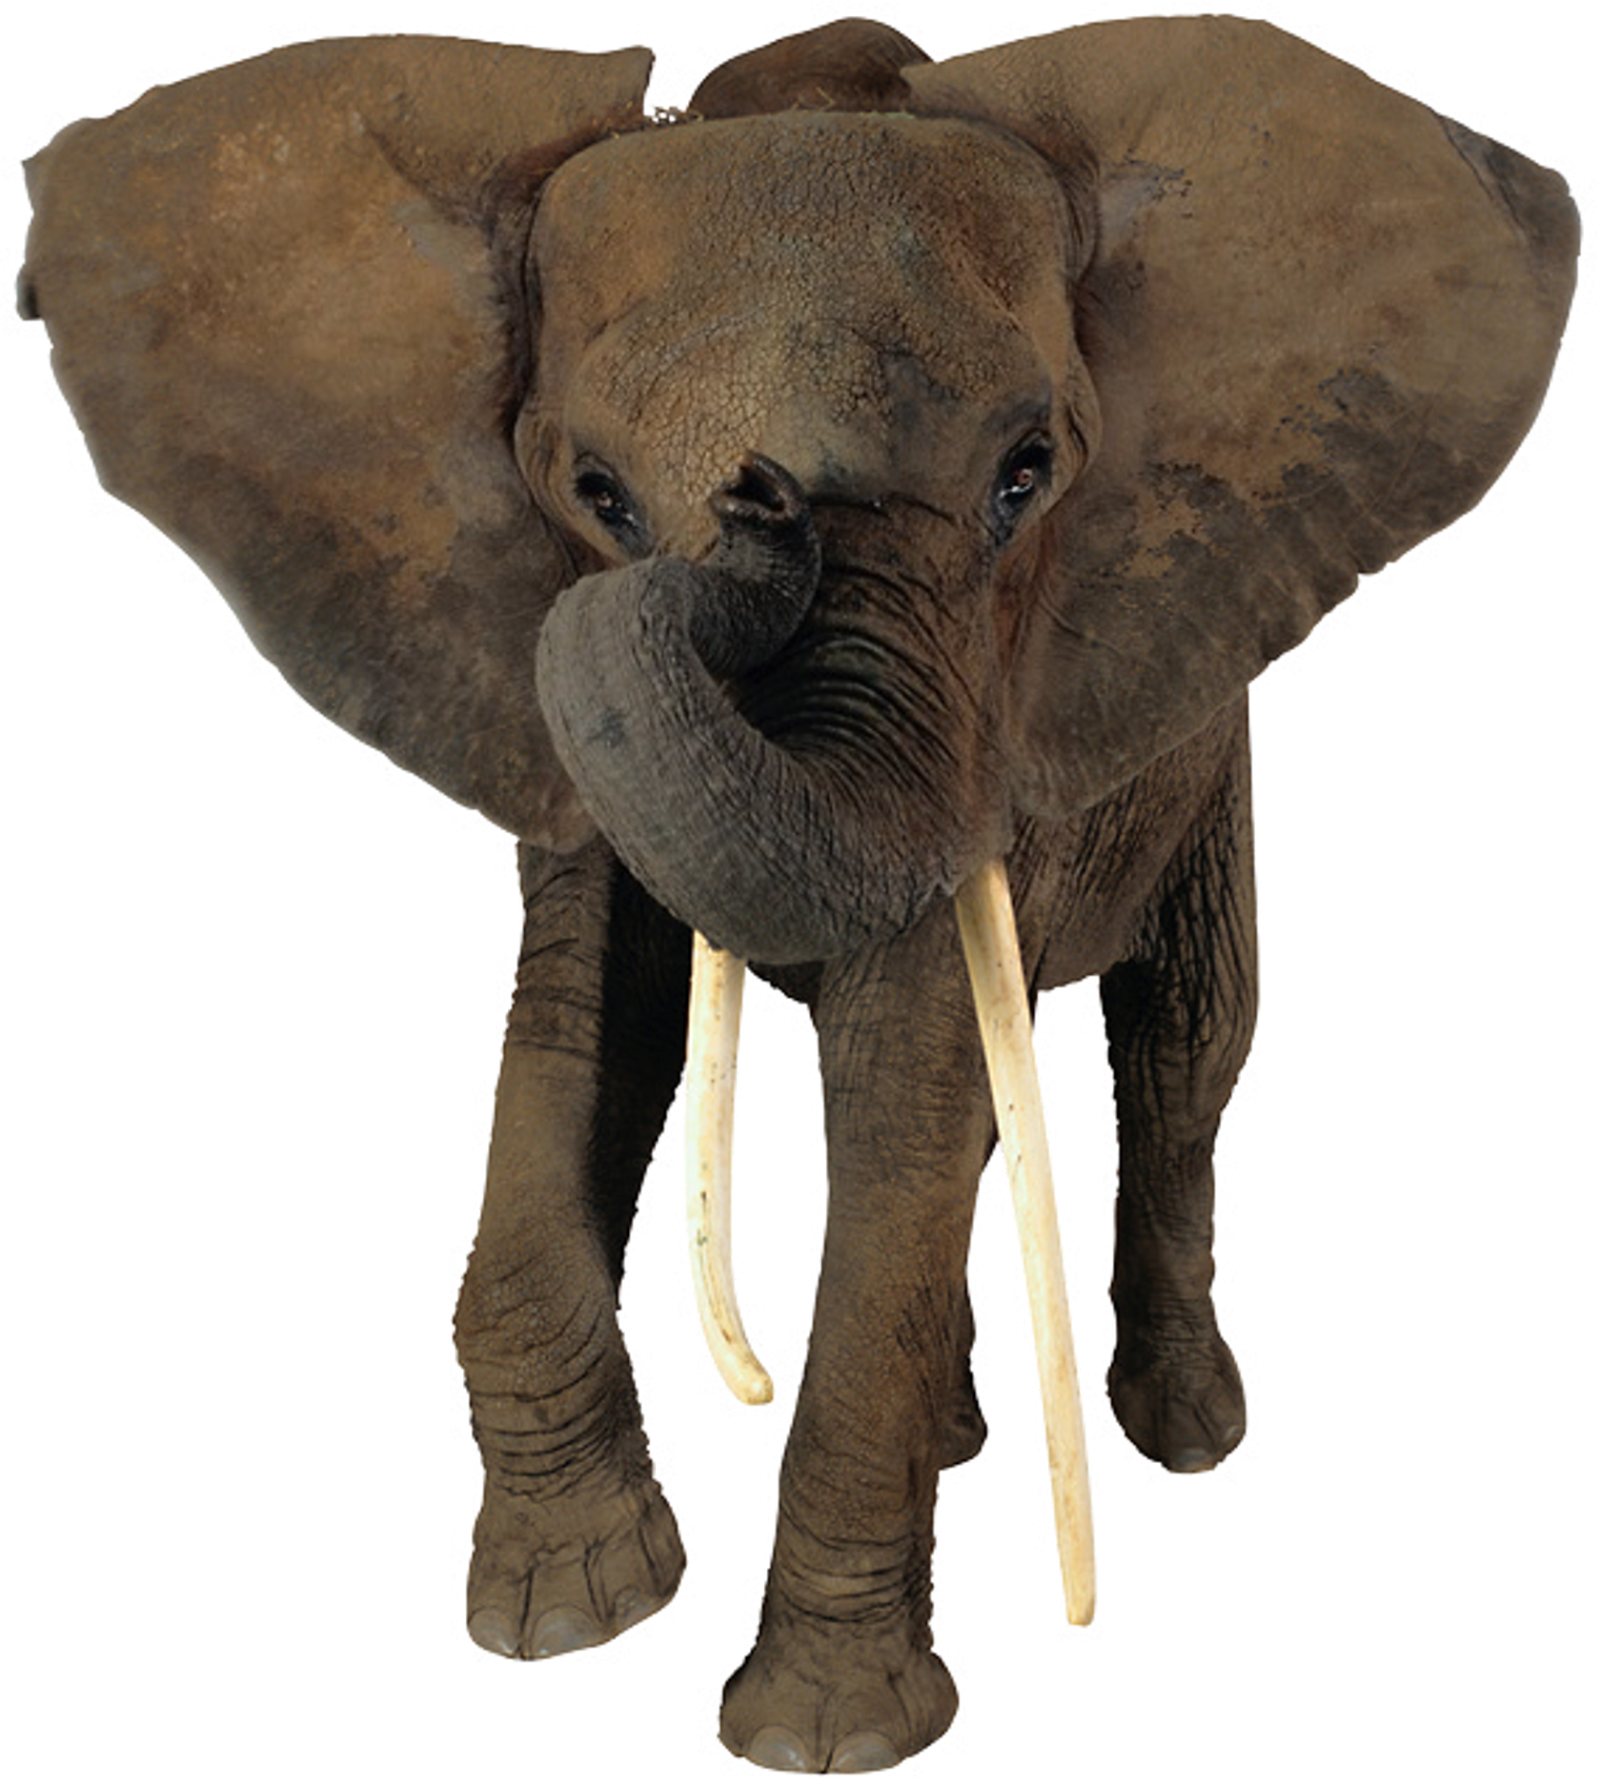 African Elephant Head Png #43230 - Free Icons and PNG ...